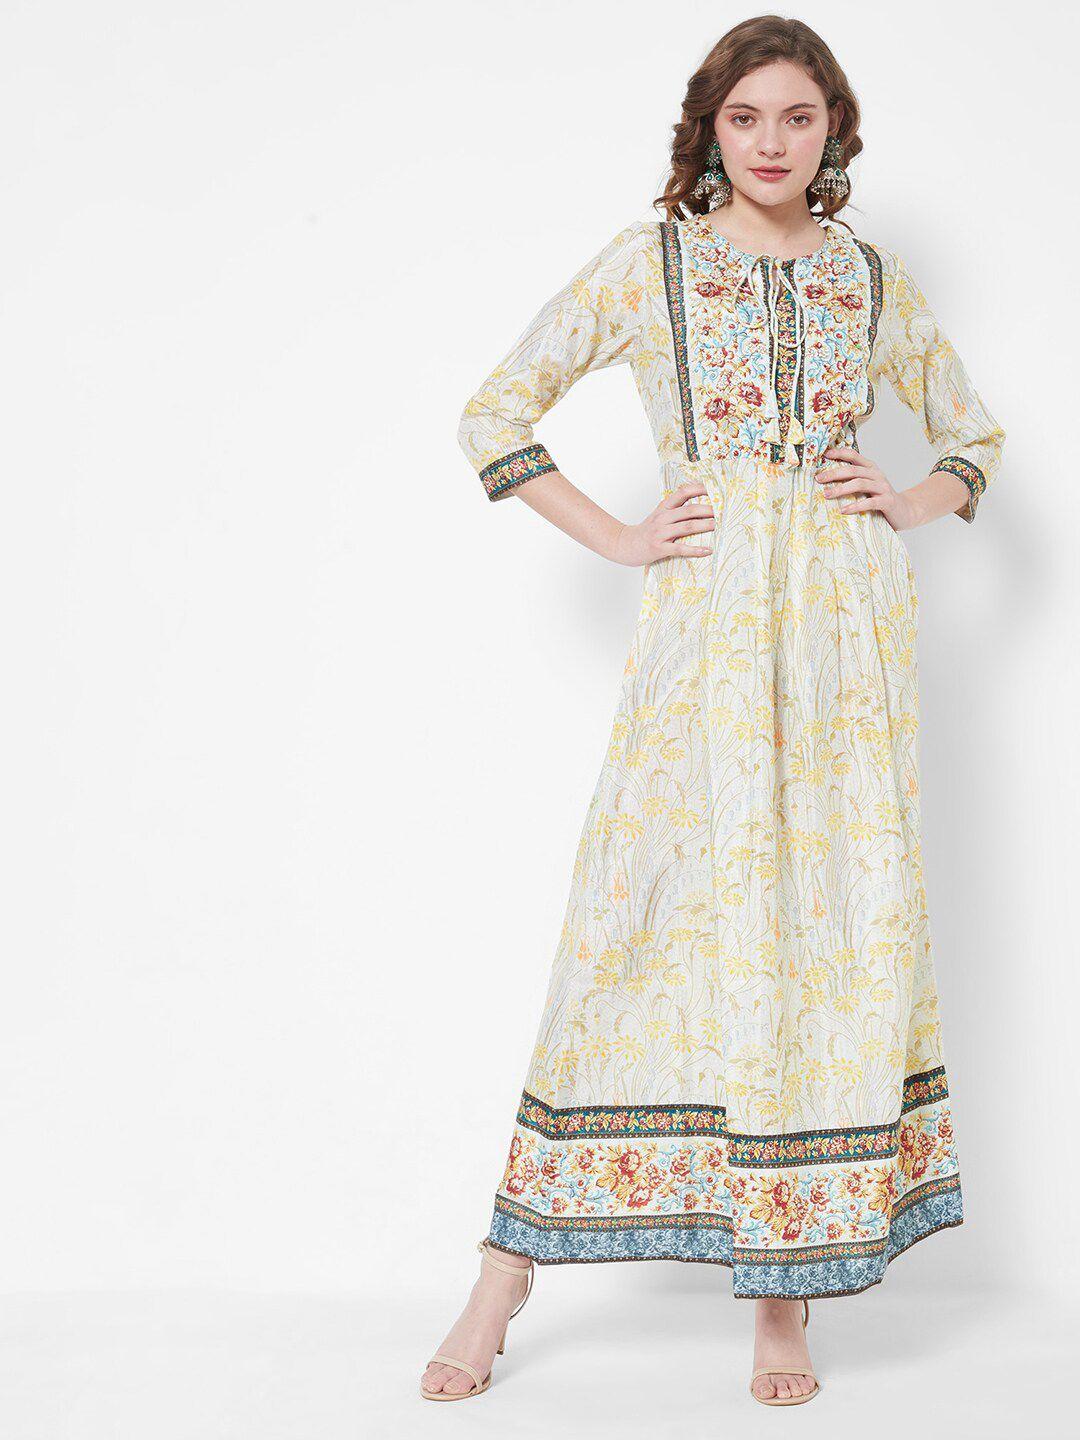 heeposh off white & yellow floral printed tie-up neck ethnic maxi dress